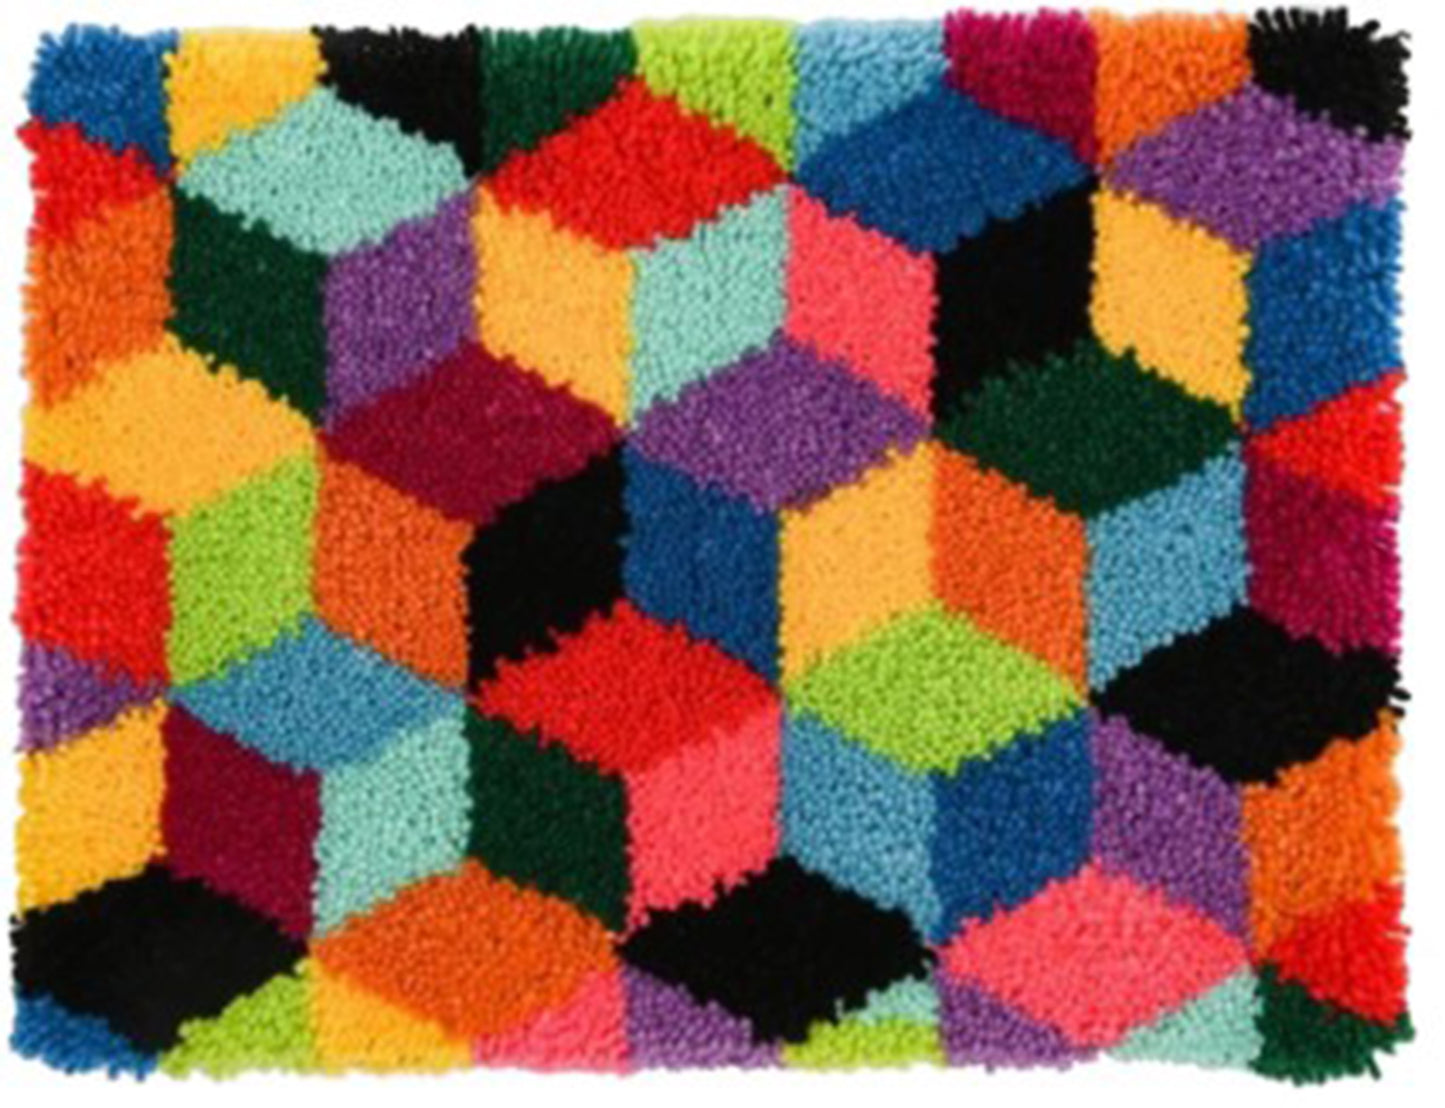 Latch Hook Kits for Adults, DIY Shaggy Craft for Beginner, Colorful Squares 60X40 CM/23.6X15.8IN